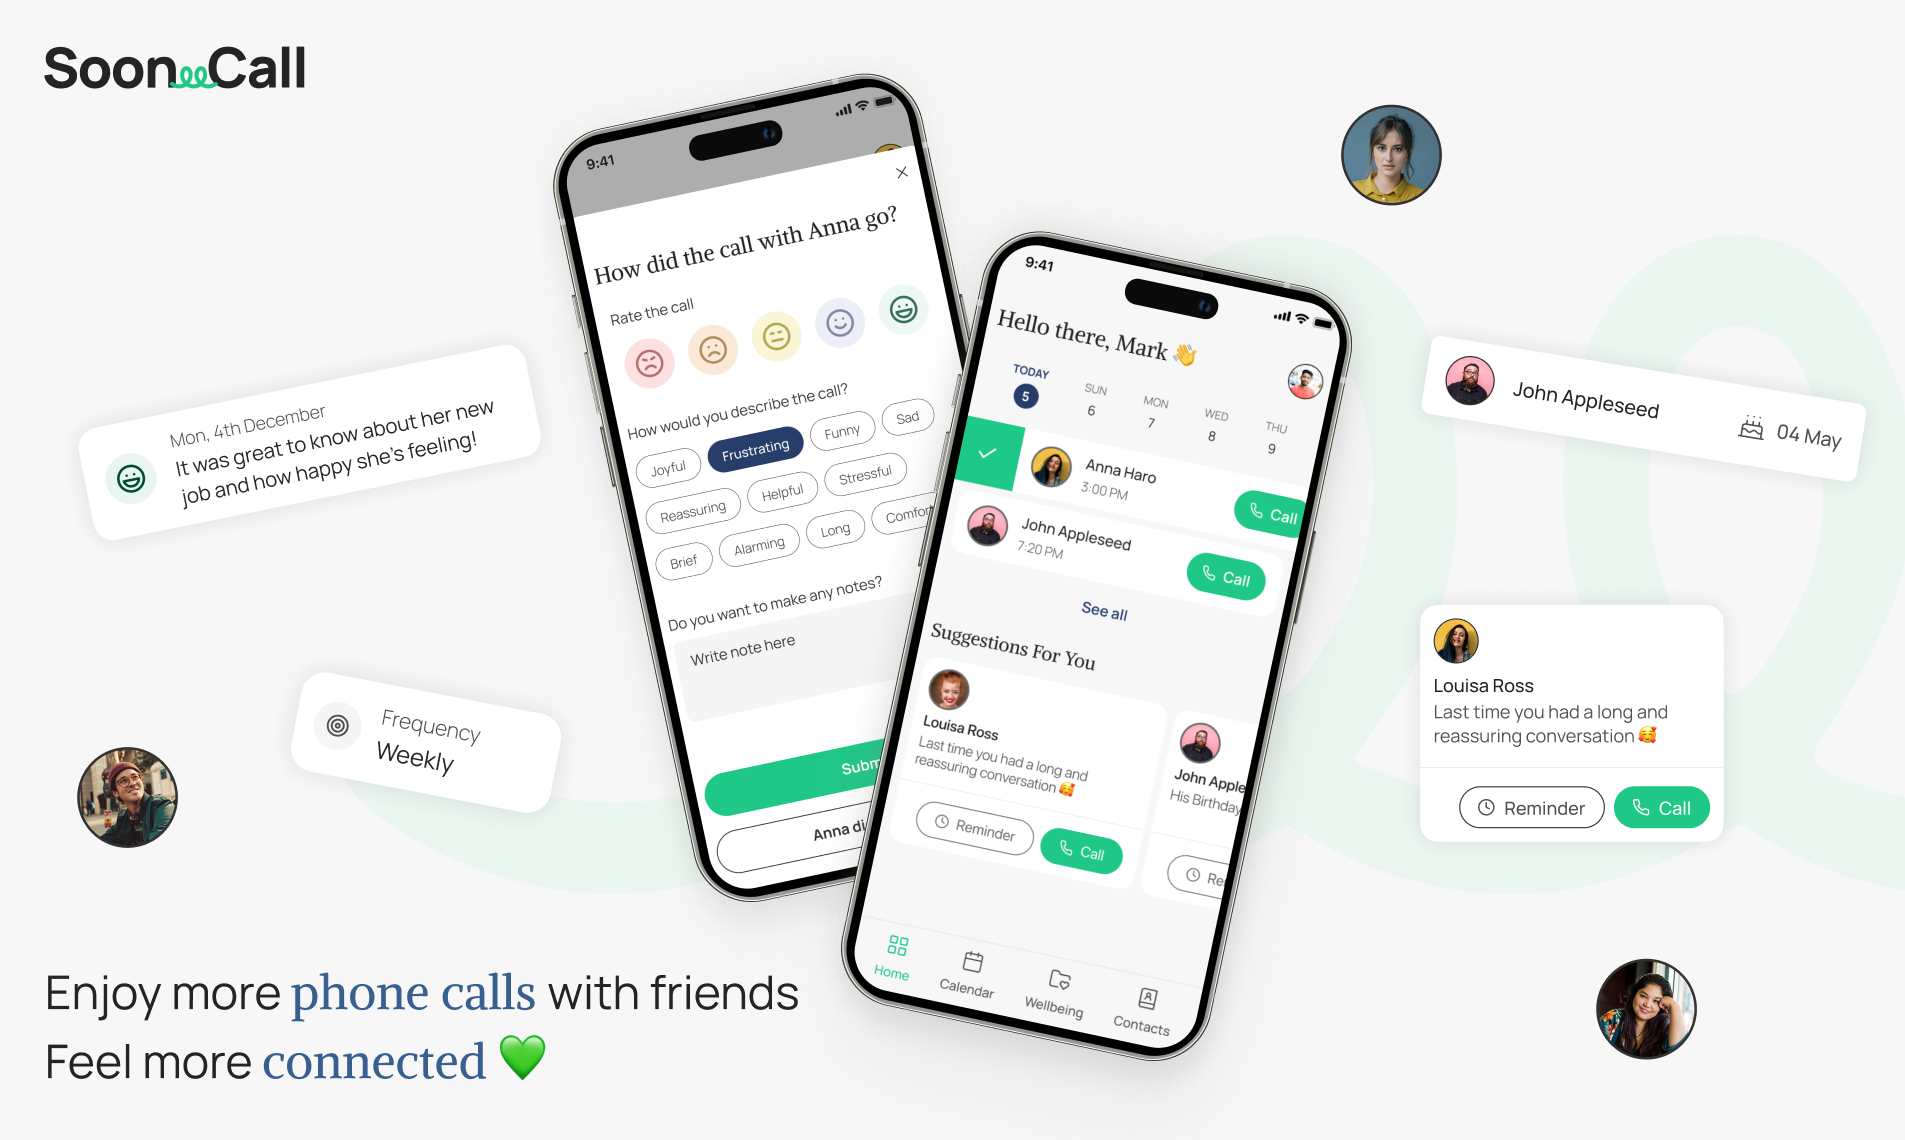 startuptile SoonCall-Manage your friendships and call your friends more often